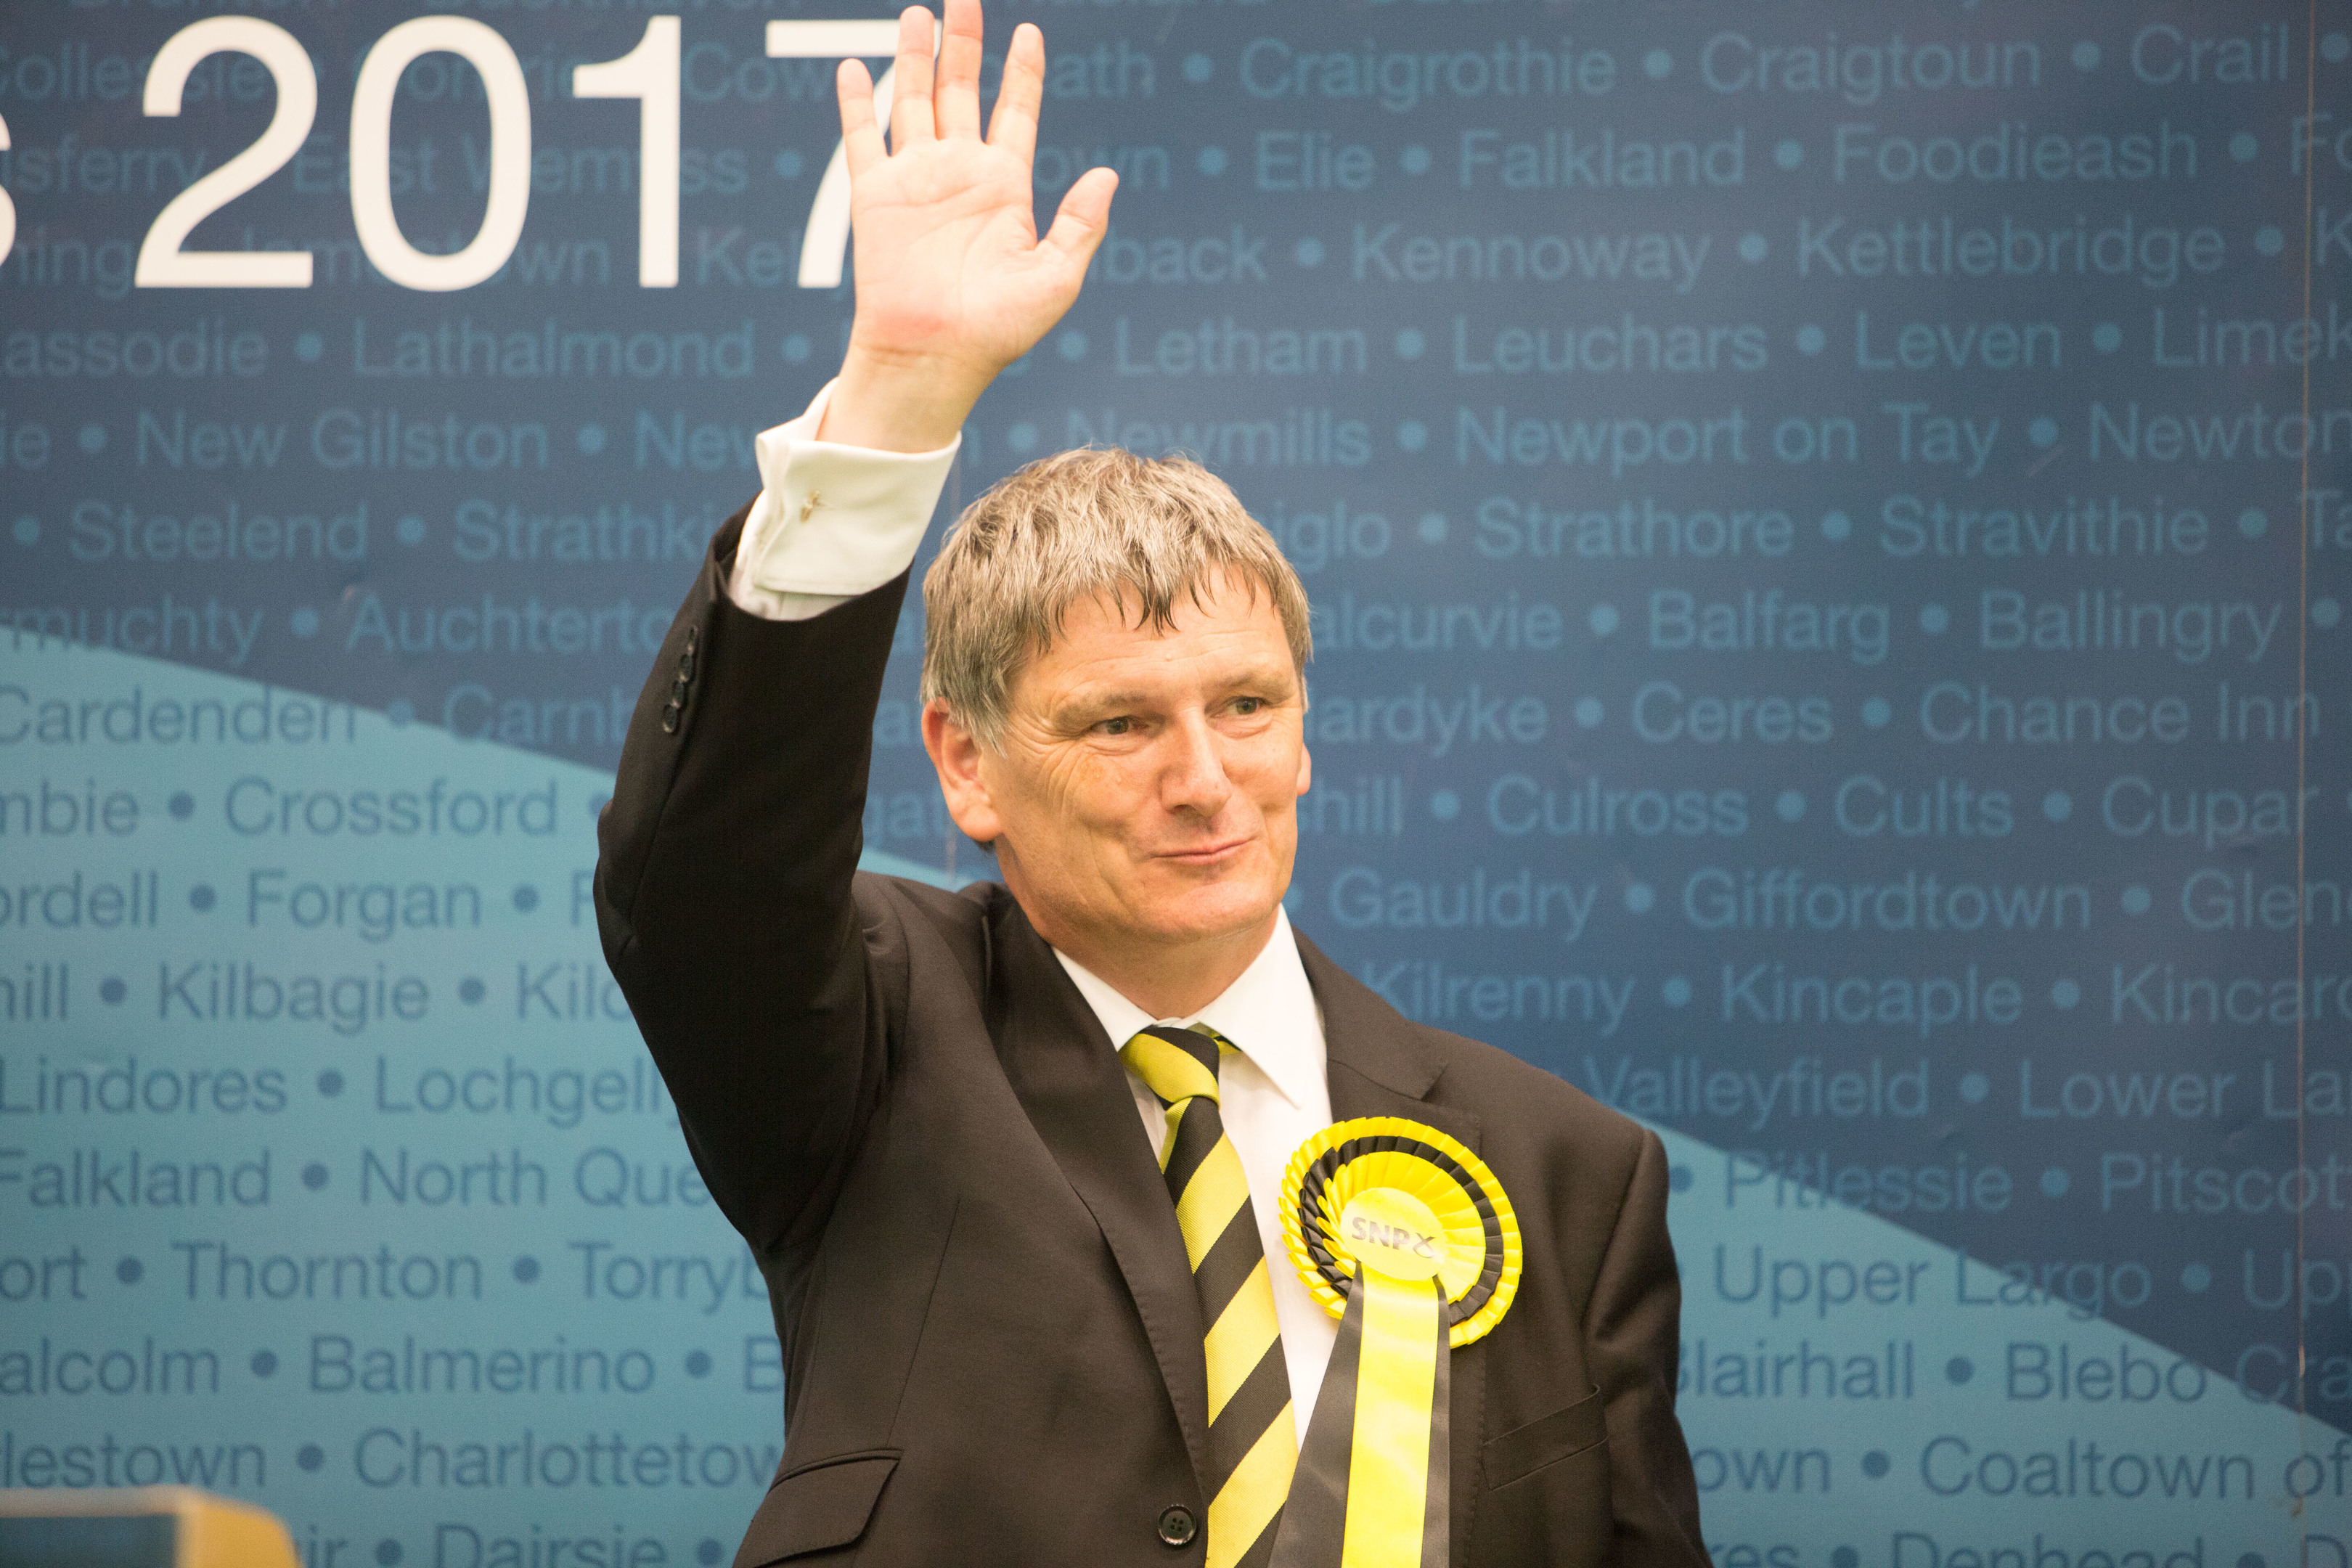 Glenrothes re-elects Peter Grant (SNP).